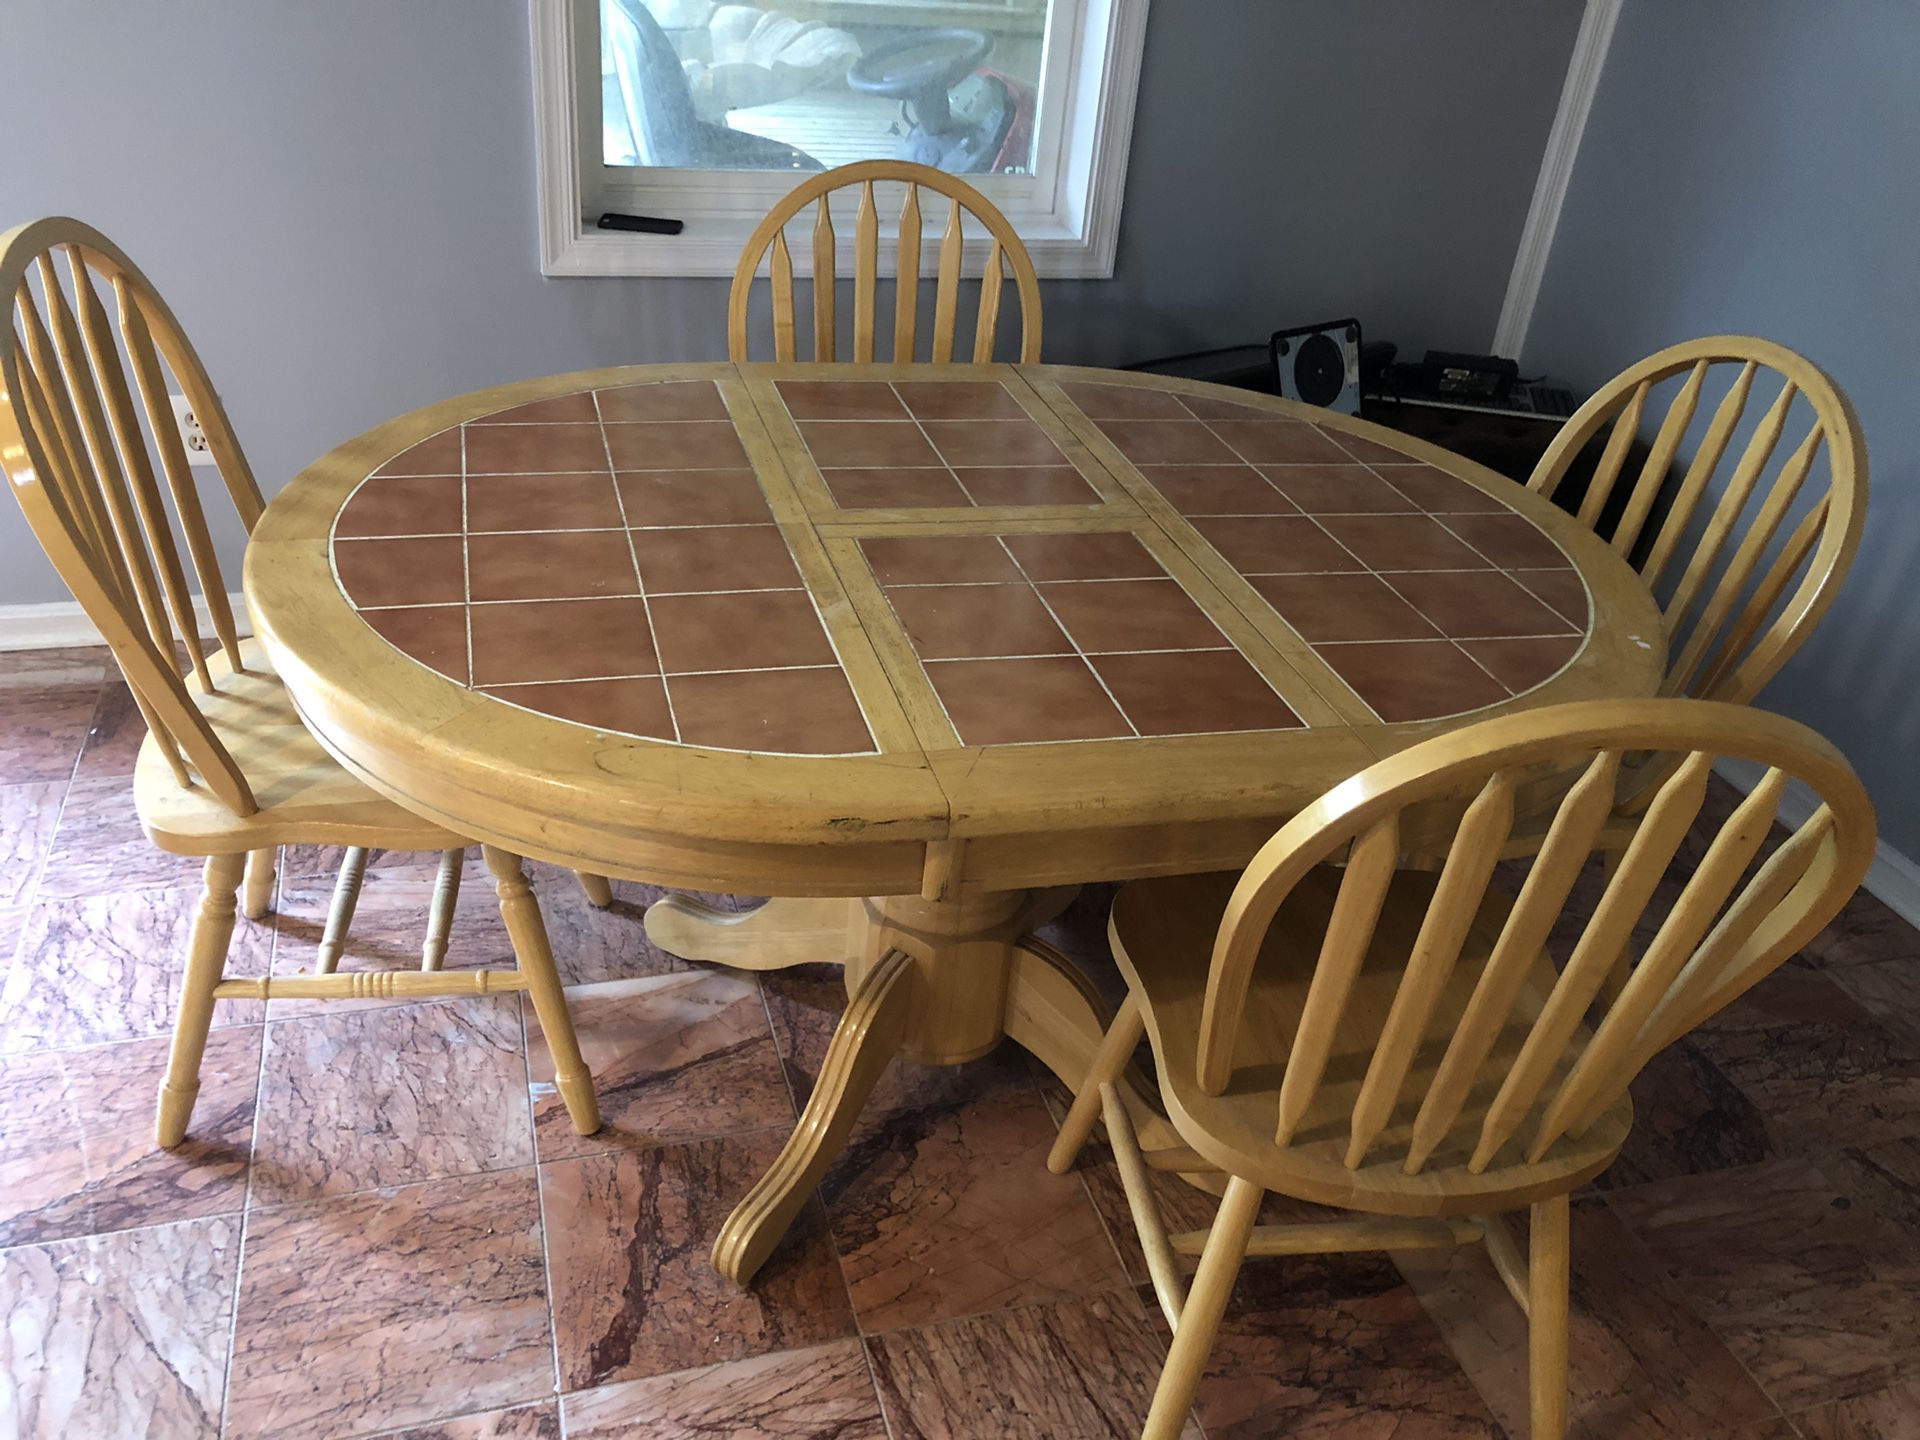 Breakfast/dining table with 4 chairs